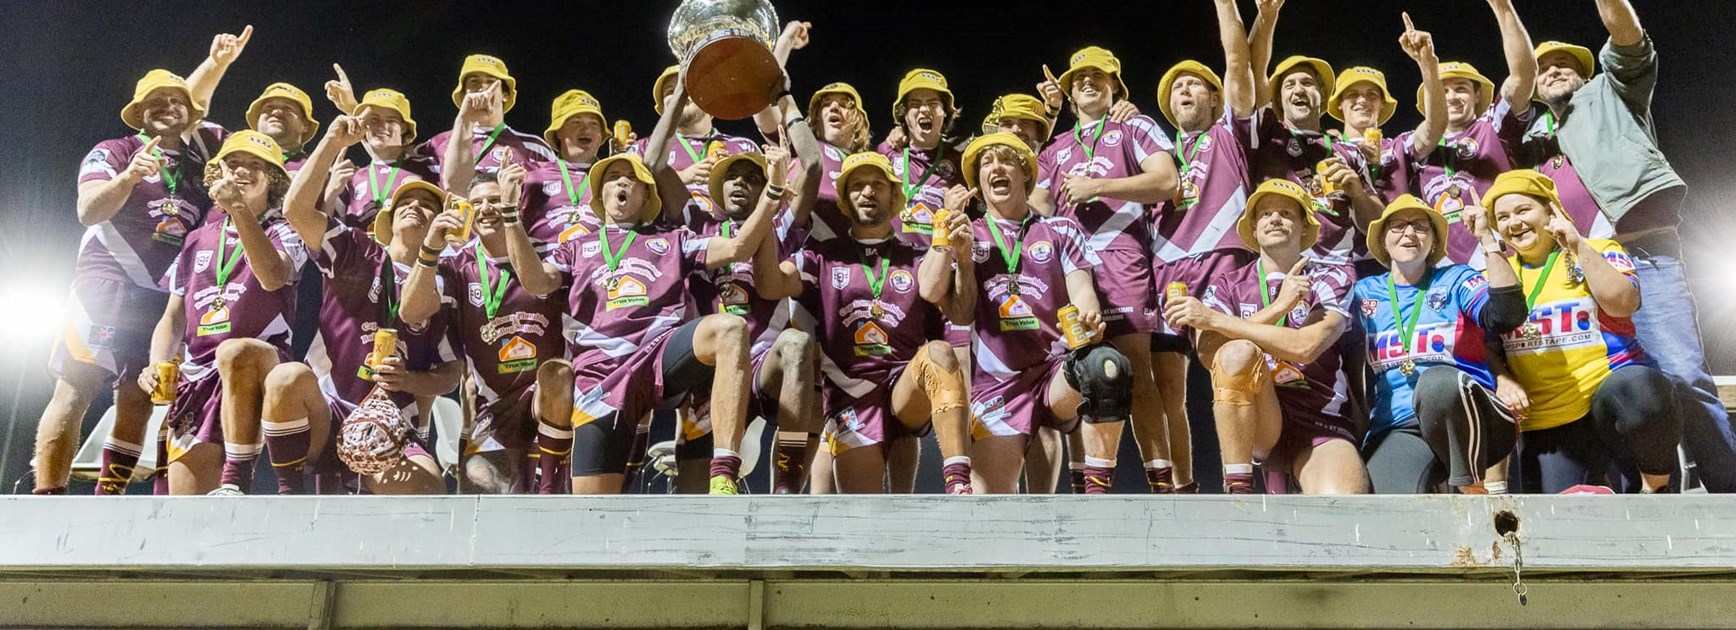 Statewide score wrap: Teen coach leads Barcaldine to stunning grand final victory